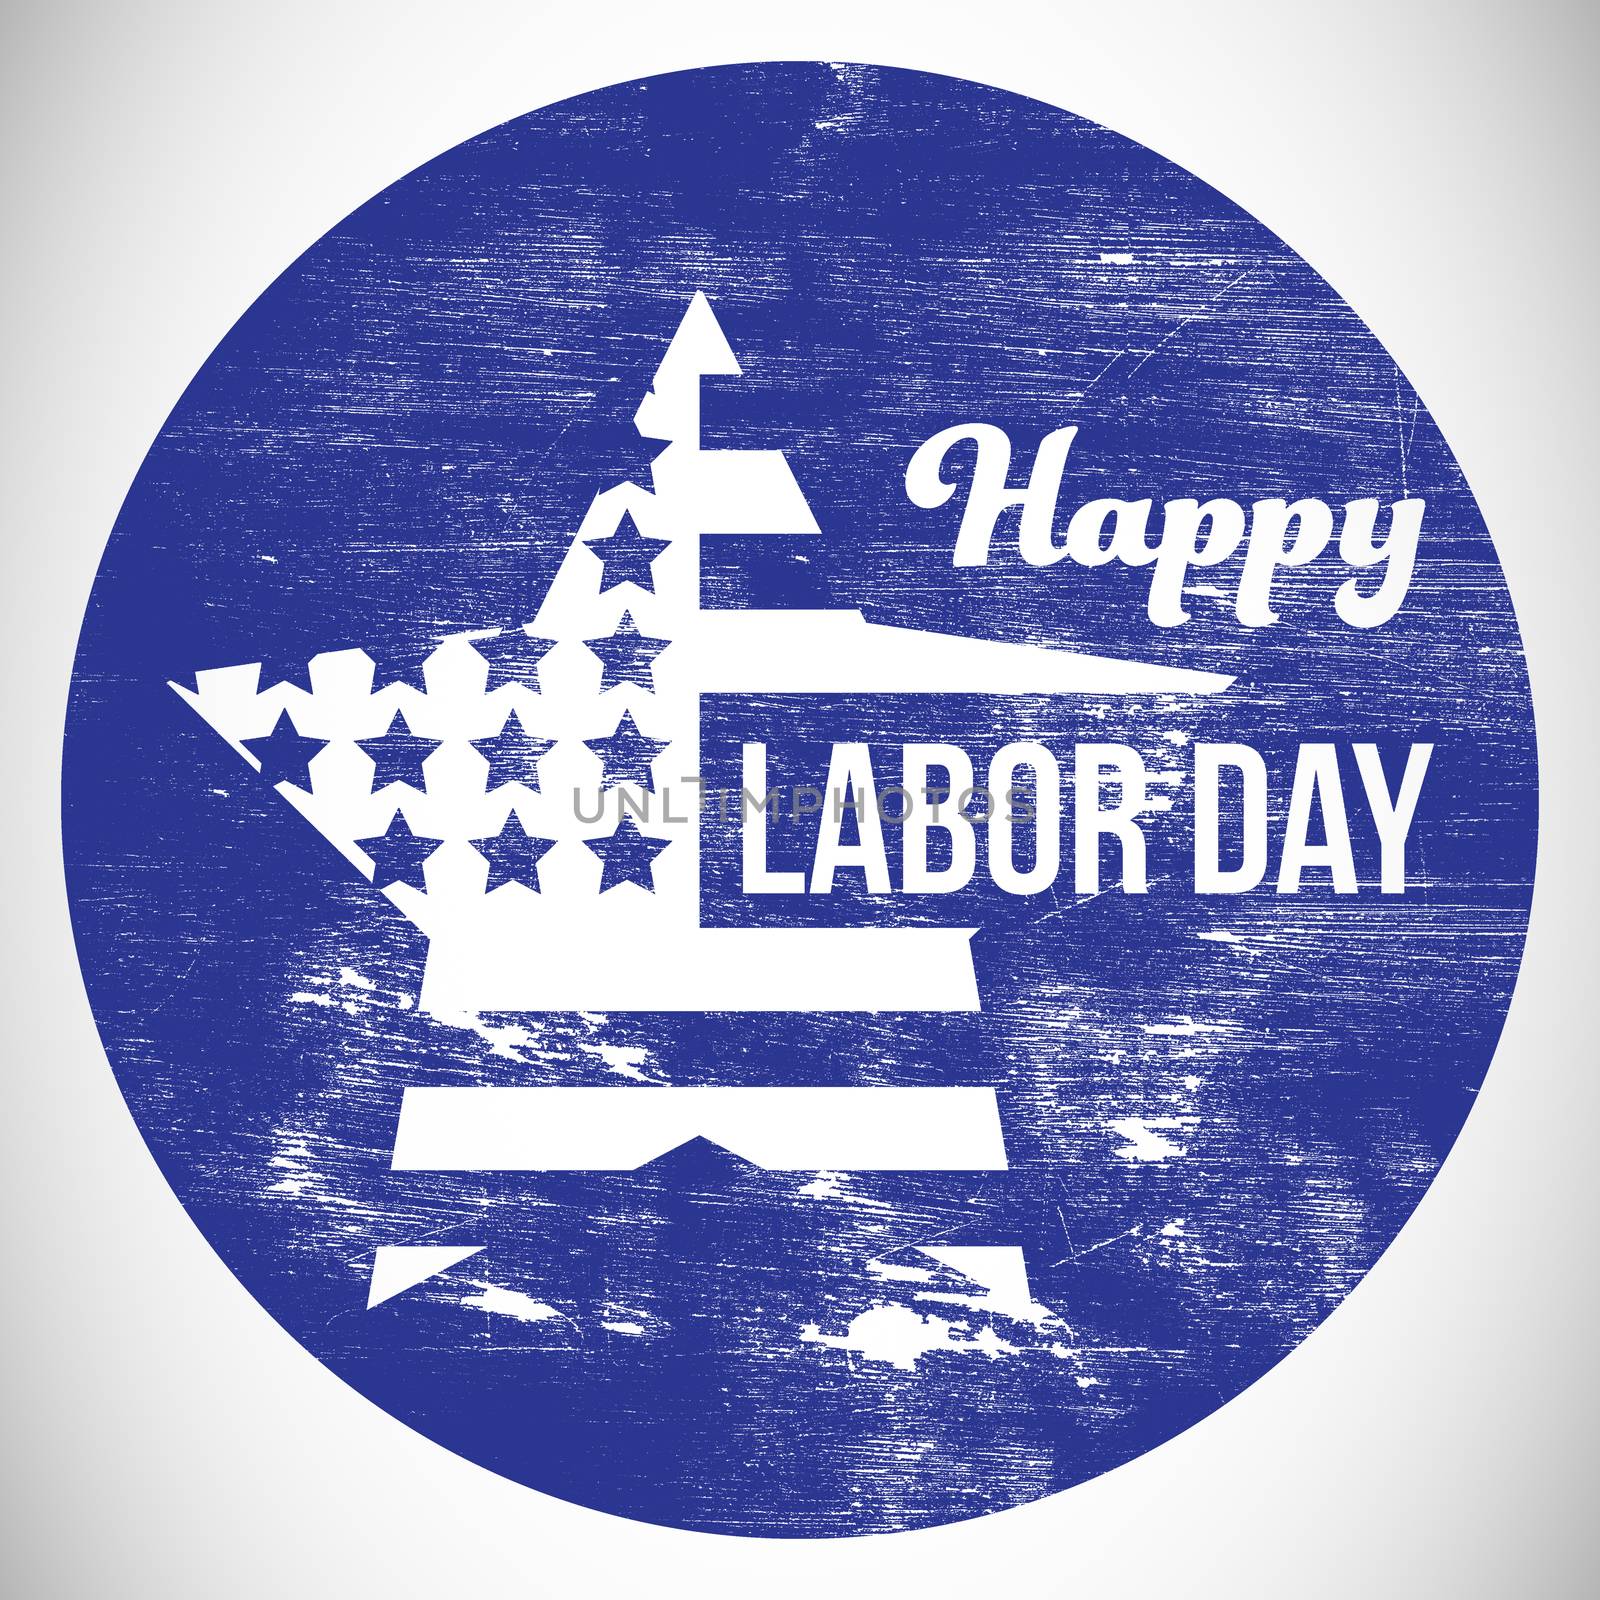 Digital composite image of happy labor day text on blue poster against white background